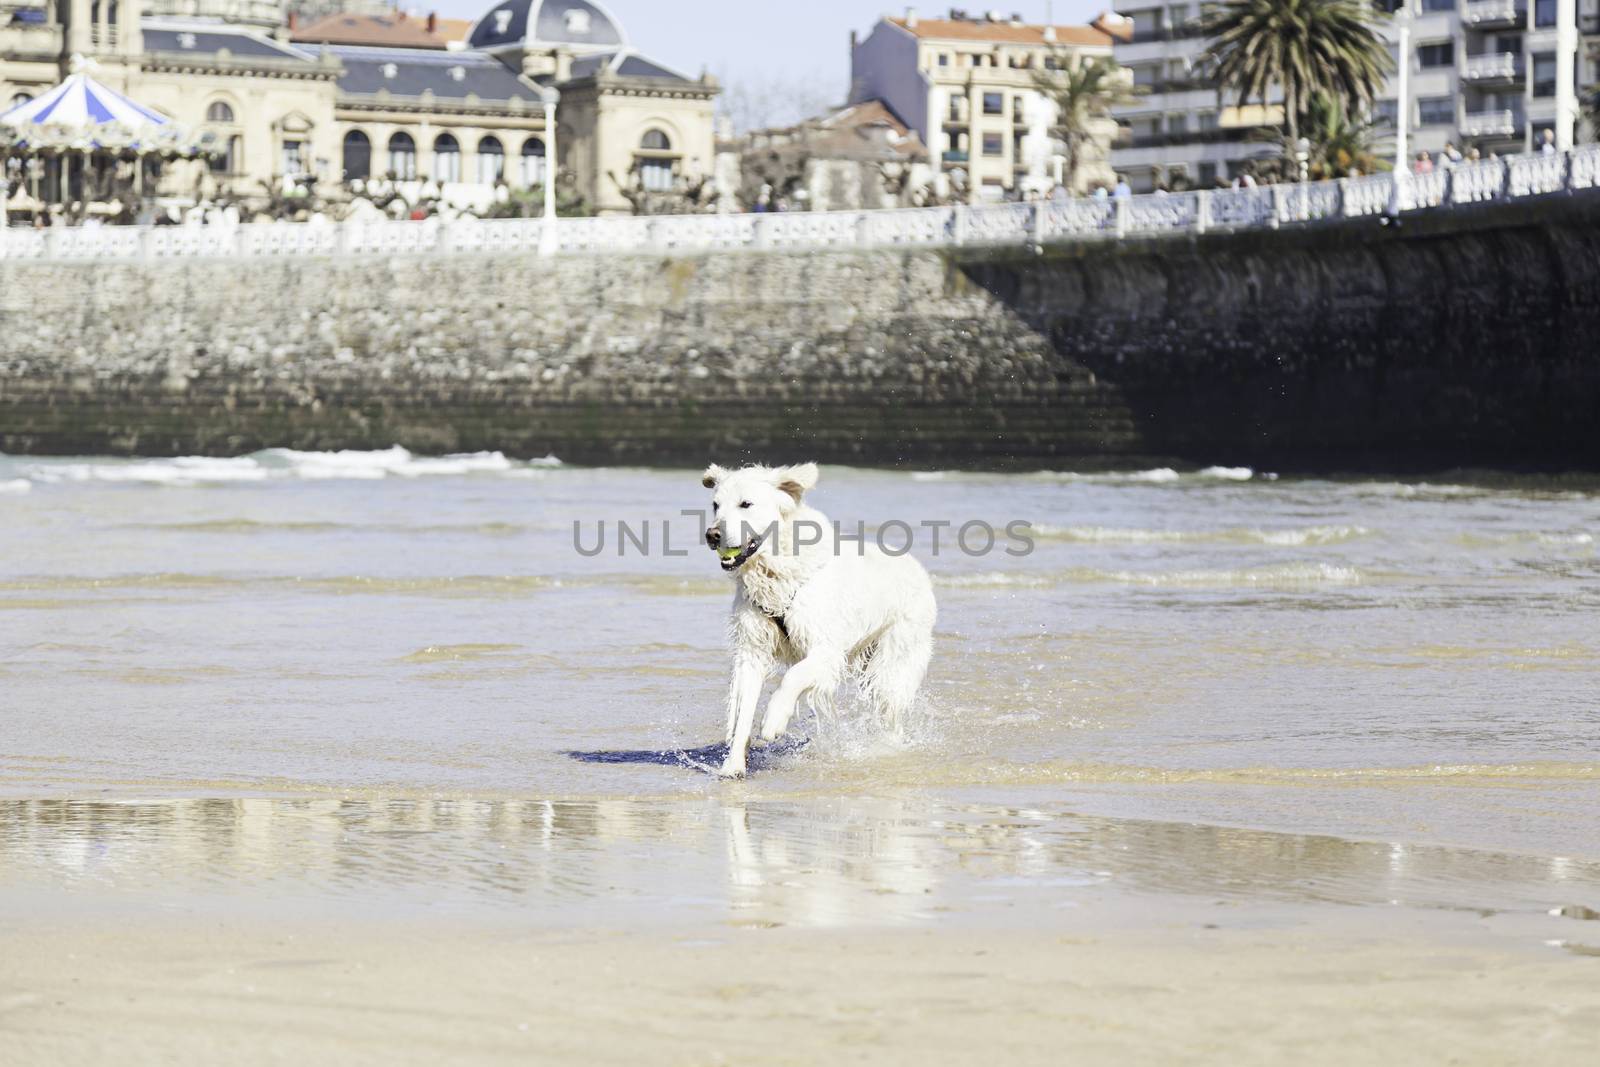 I dog playing on the beach, detail of a pet enjoying the sea, fun and games, animal and nature